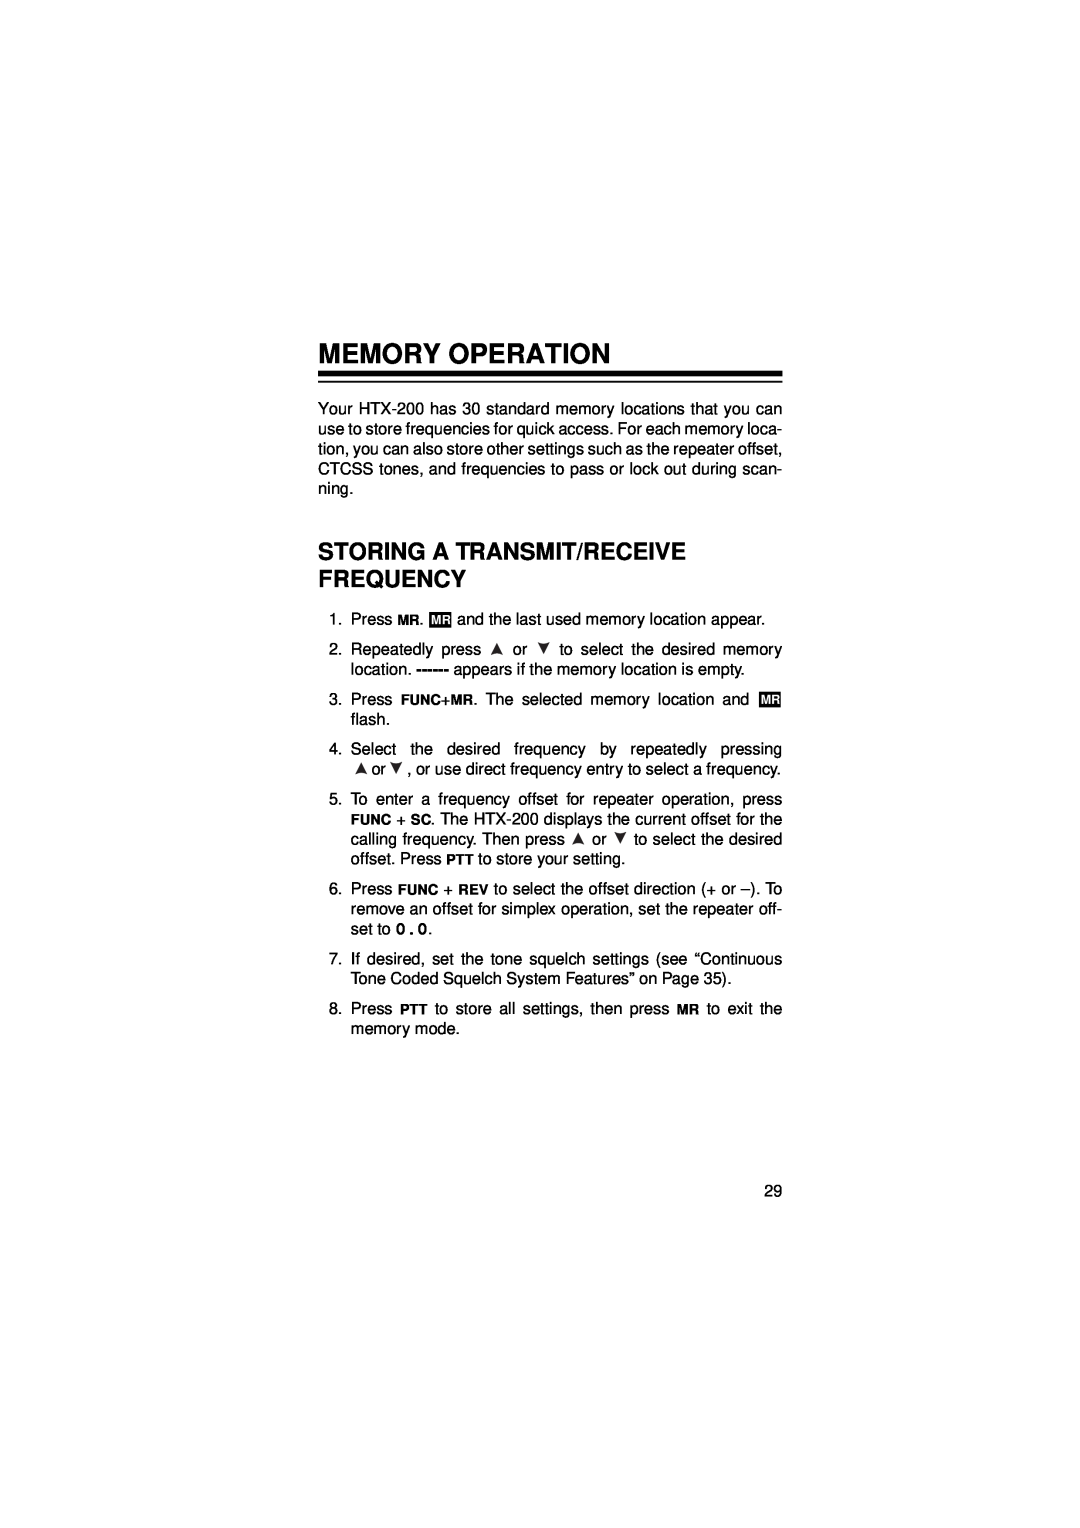 Radio Shack HTX-200 owner manual Memory Operation, Storing A Transmit/Receive Frequency 